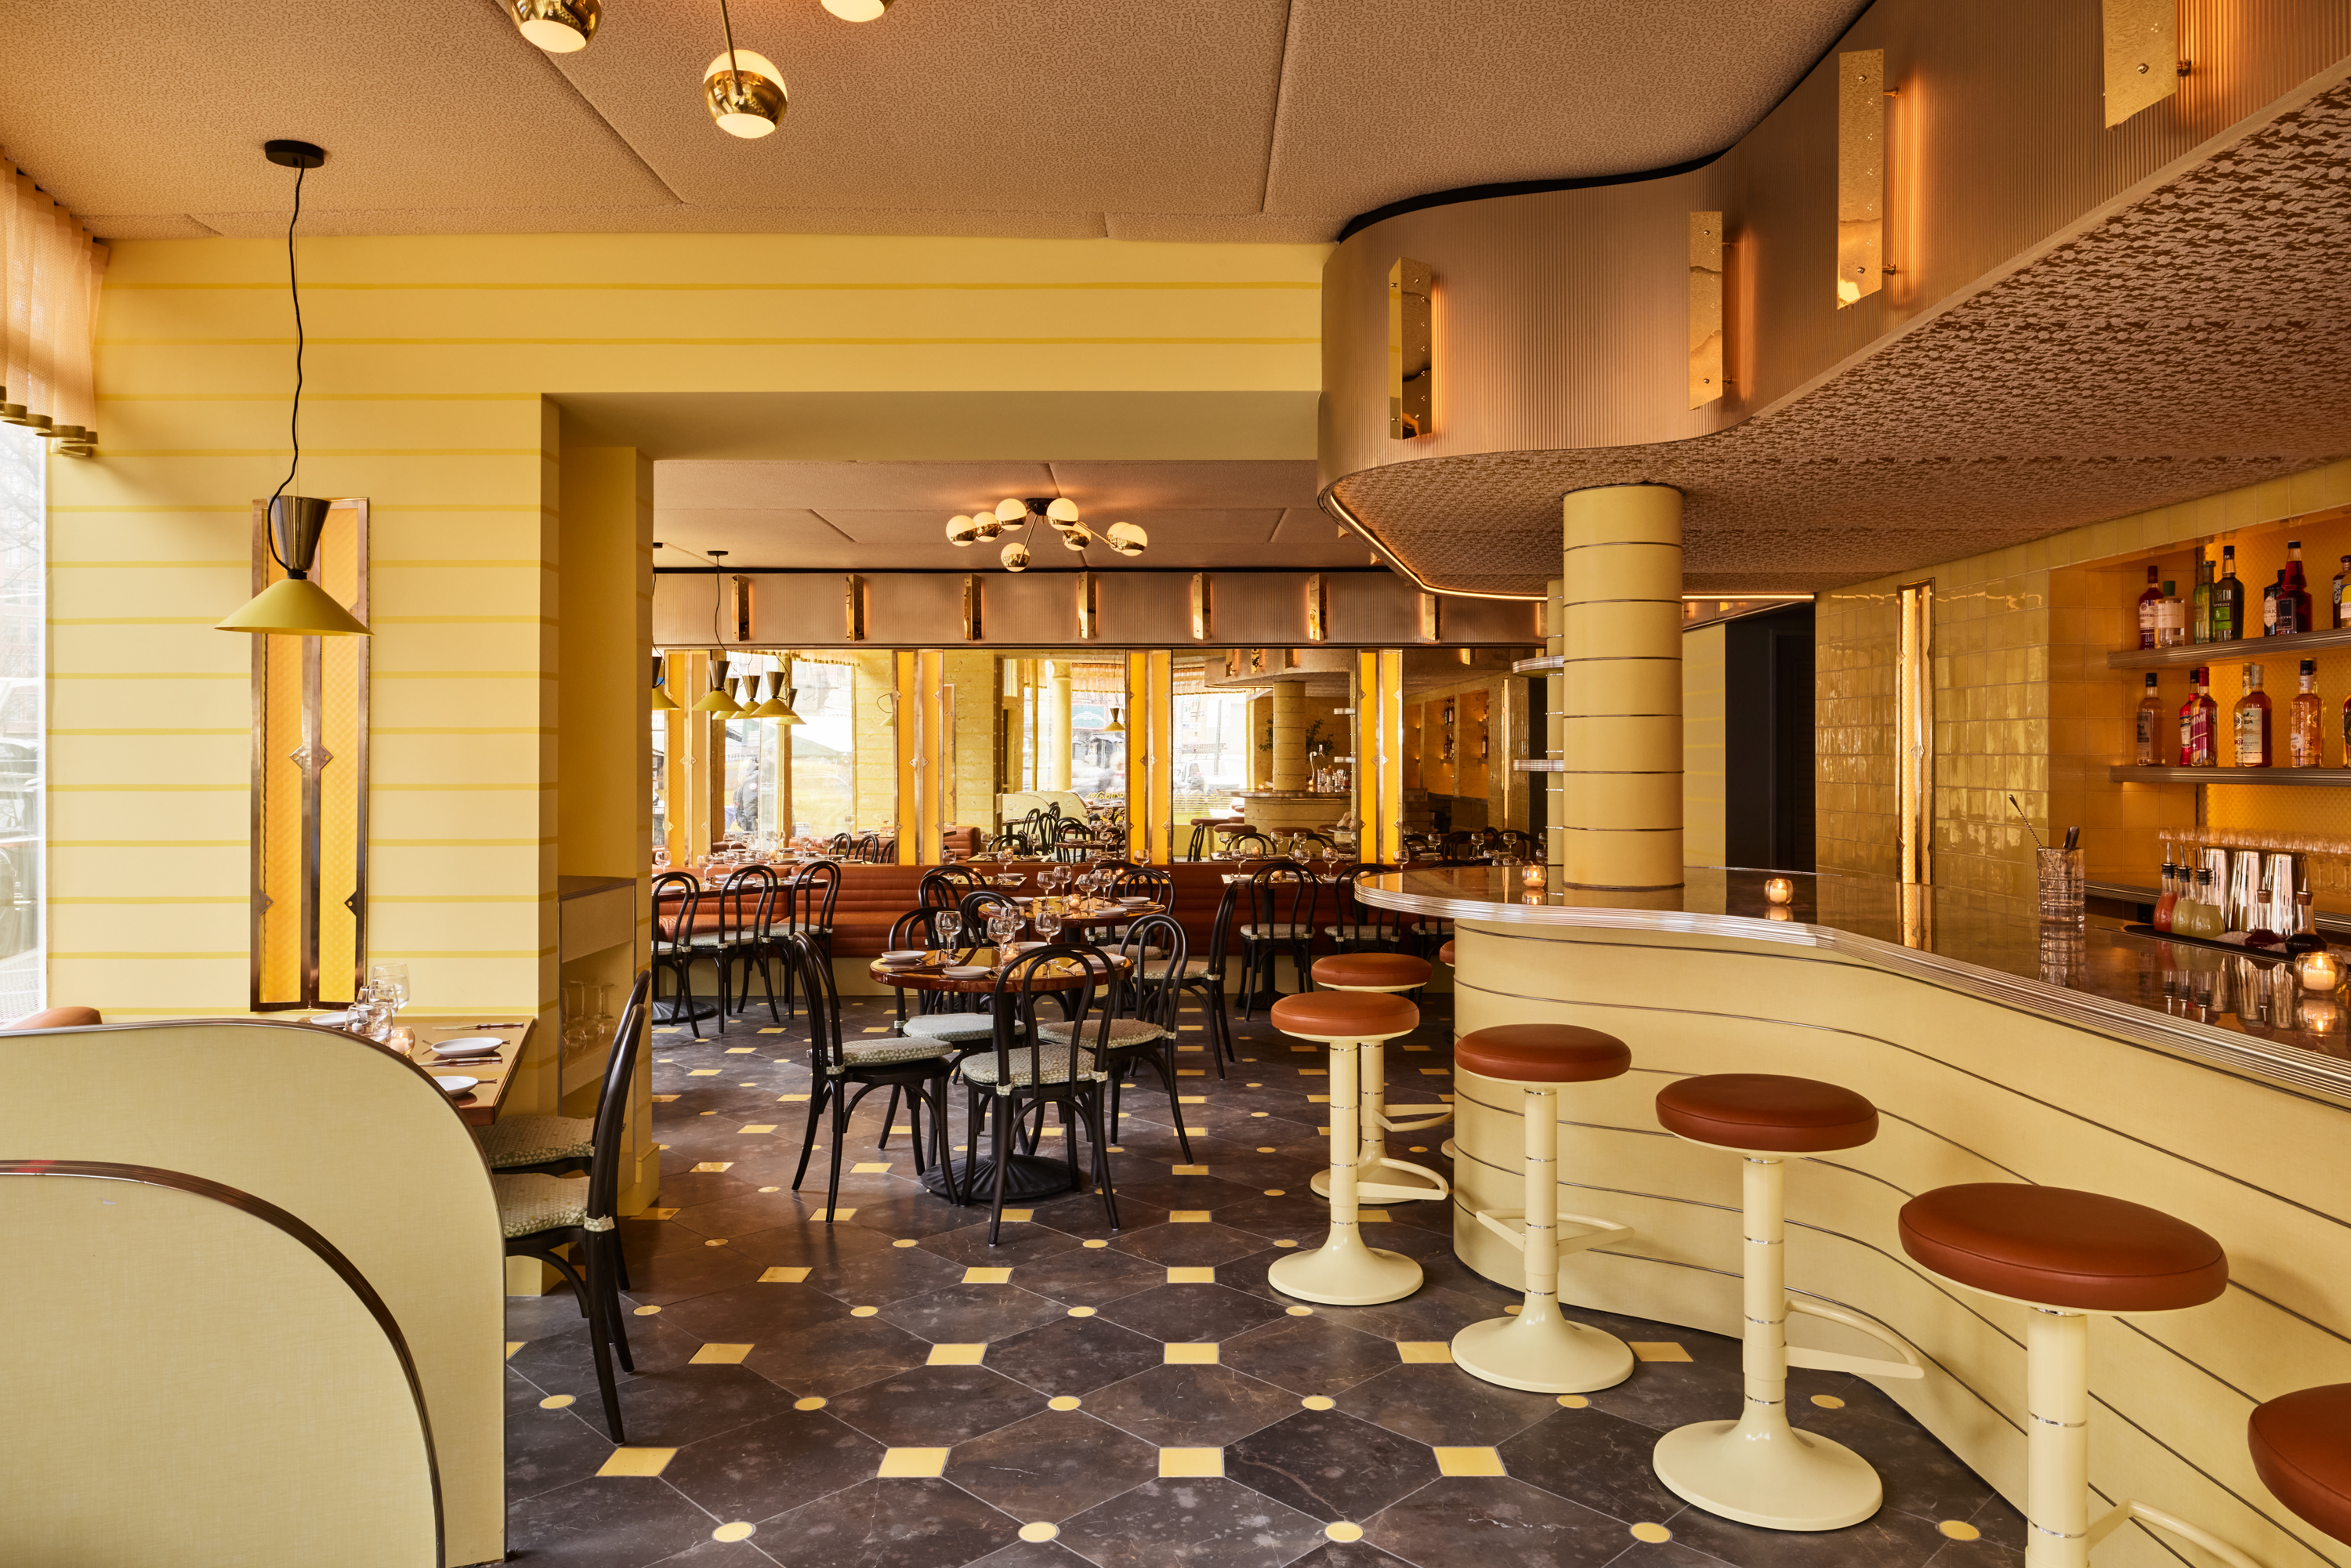 A yellow-accented bar and restaurant